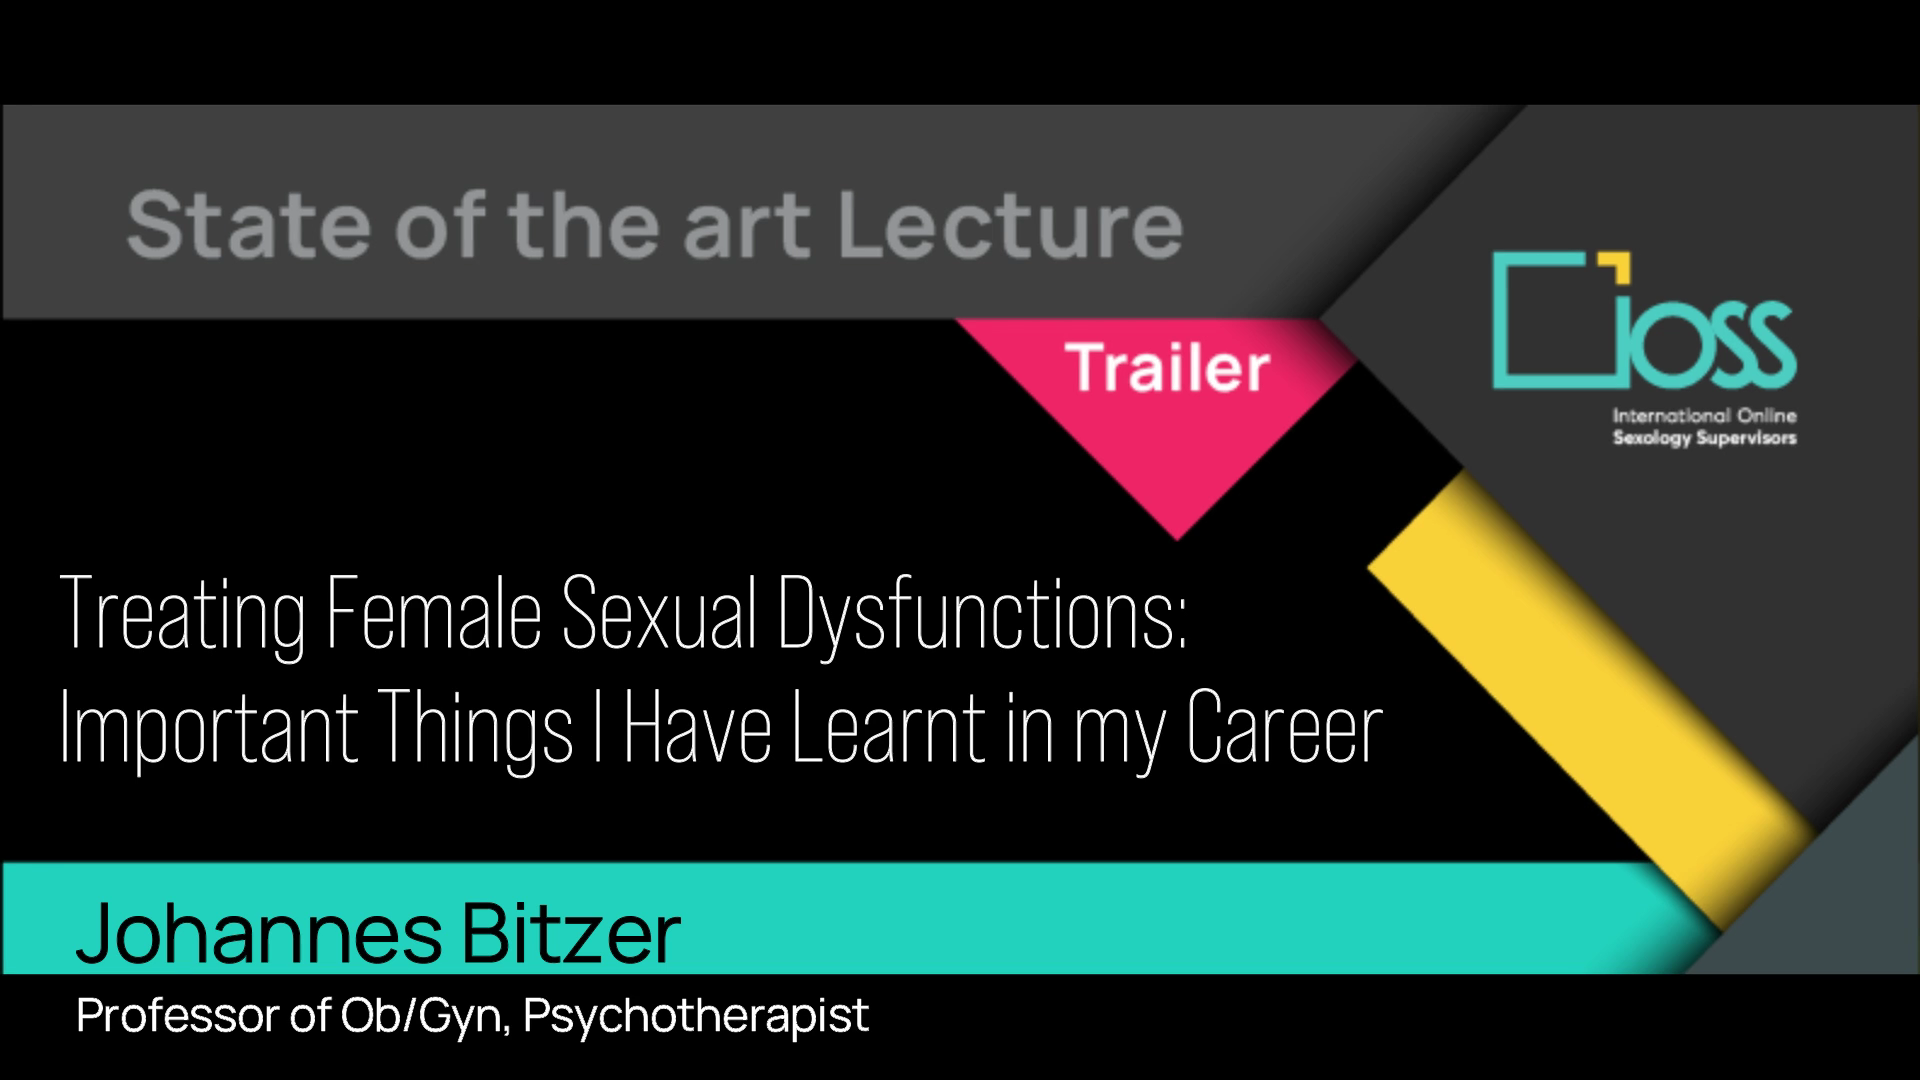 Trailer Treating Female Sexual Dysfunctions: Important Things I Have Learned in my Career